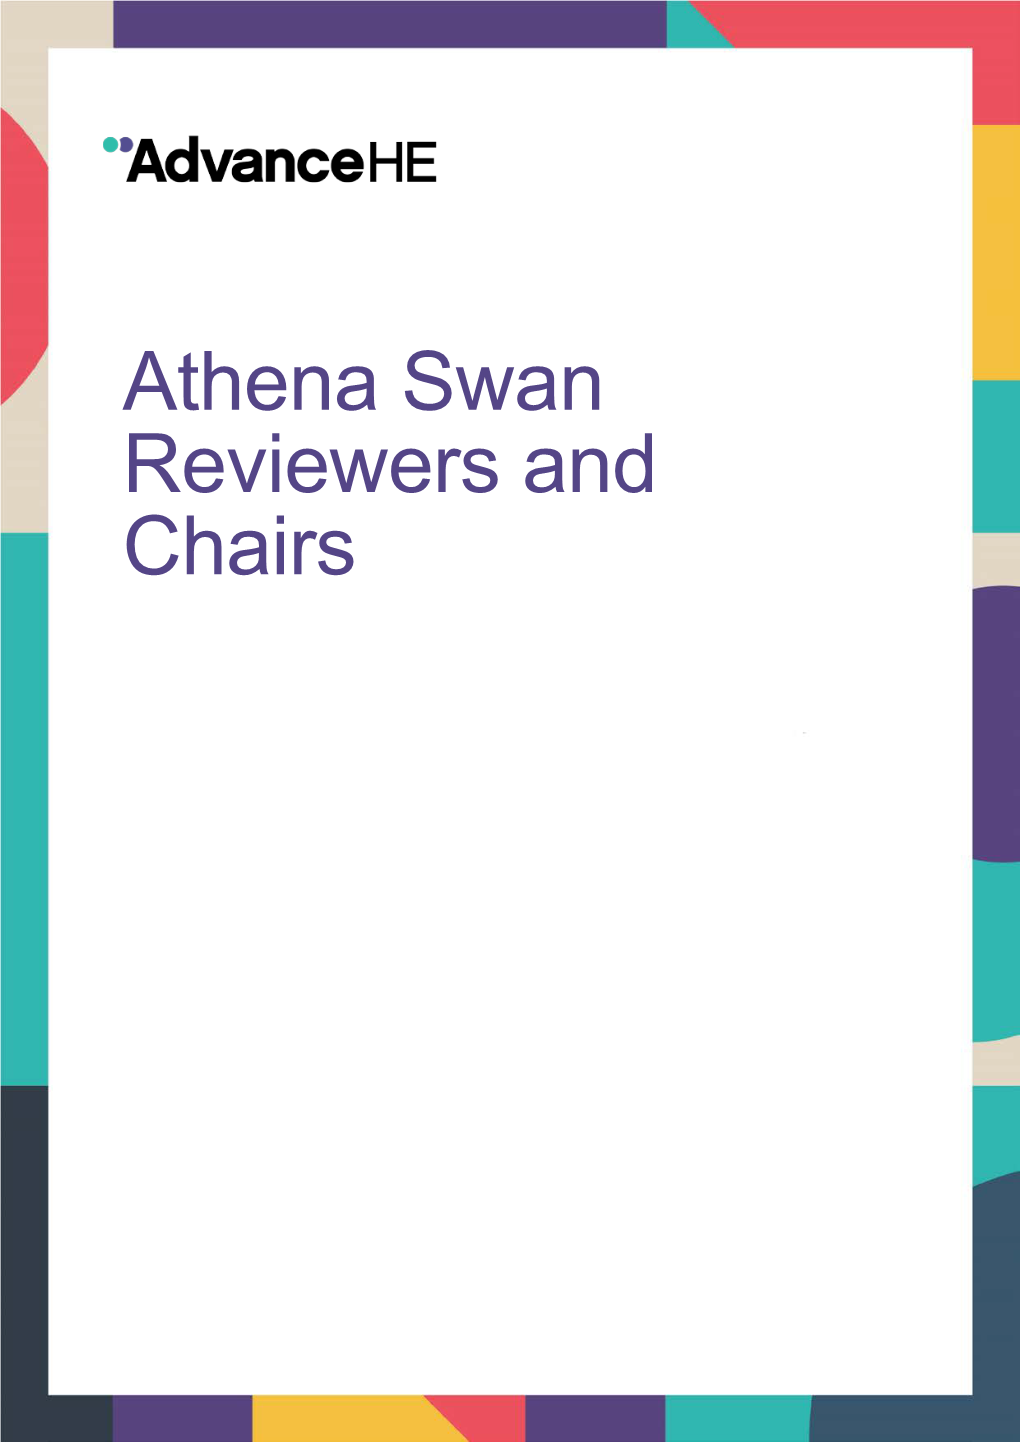 Athena Swan Reviewers and Chairs